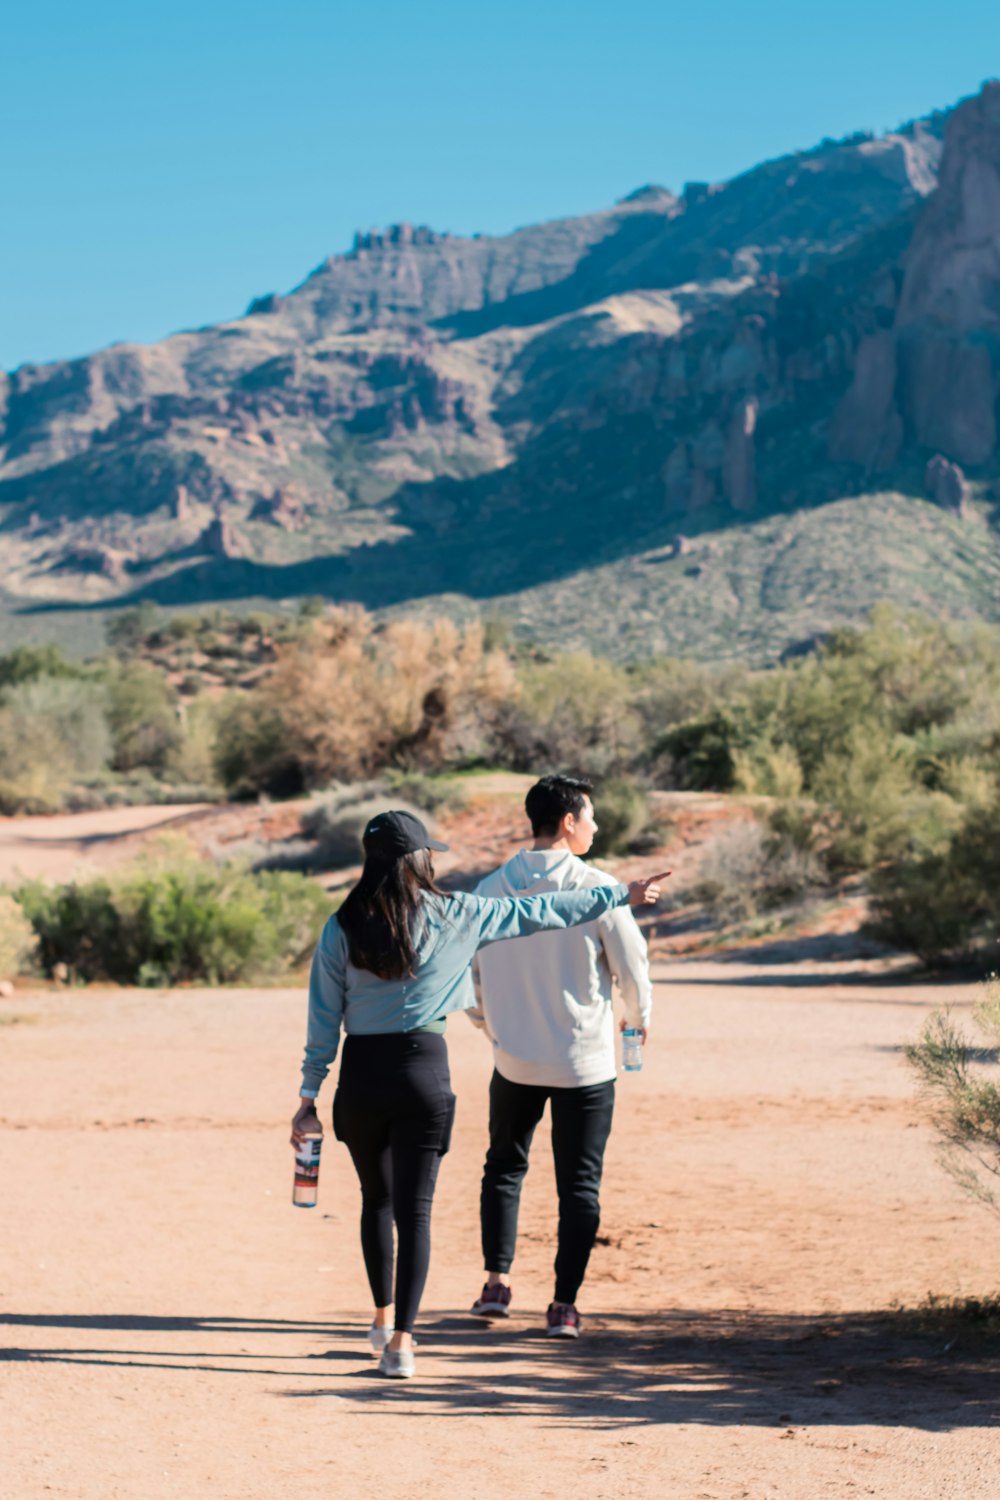 a man and a woman walking down a dirt road